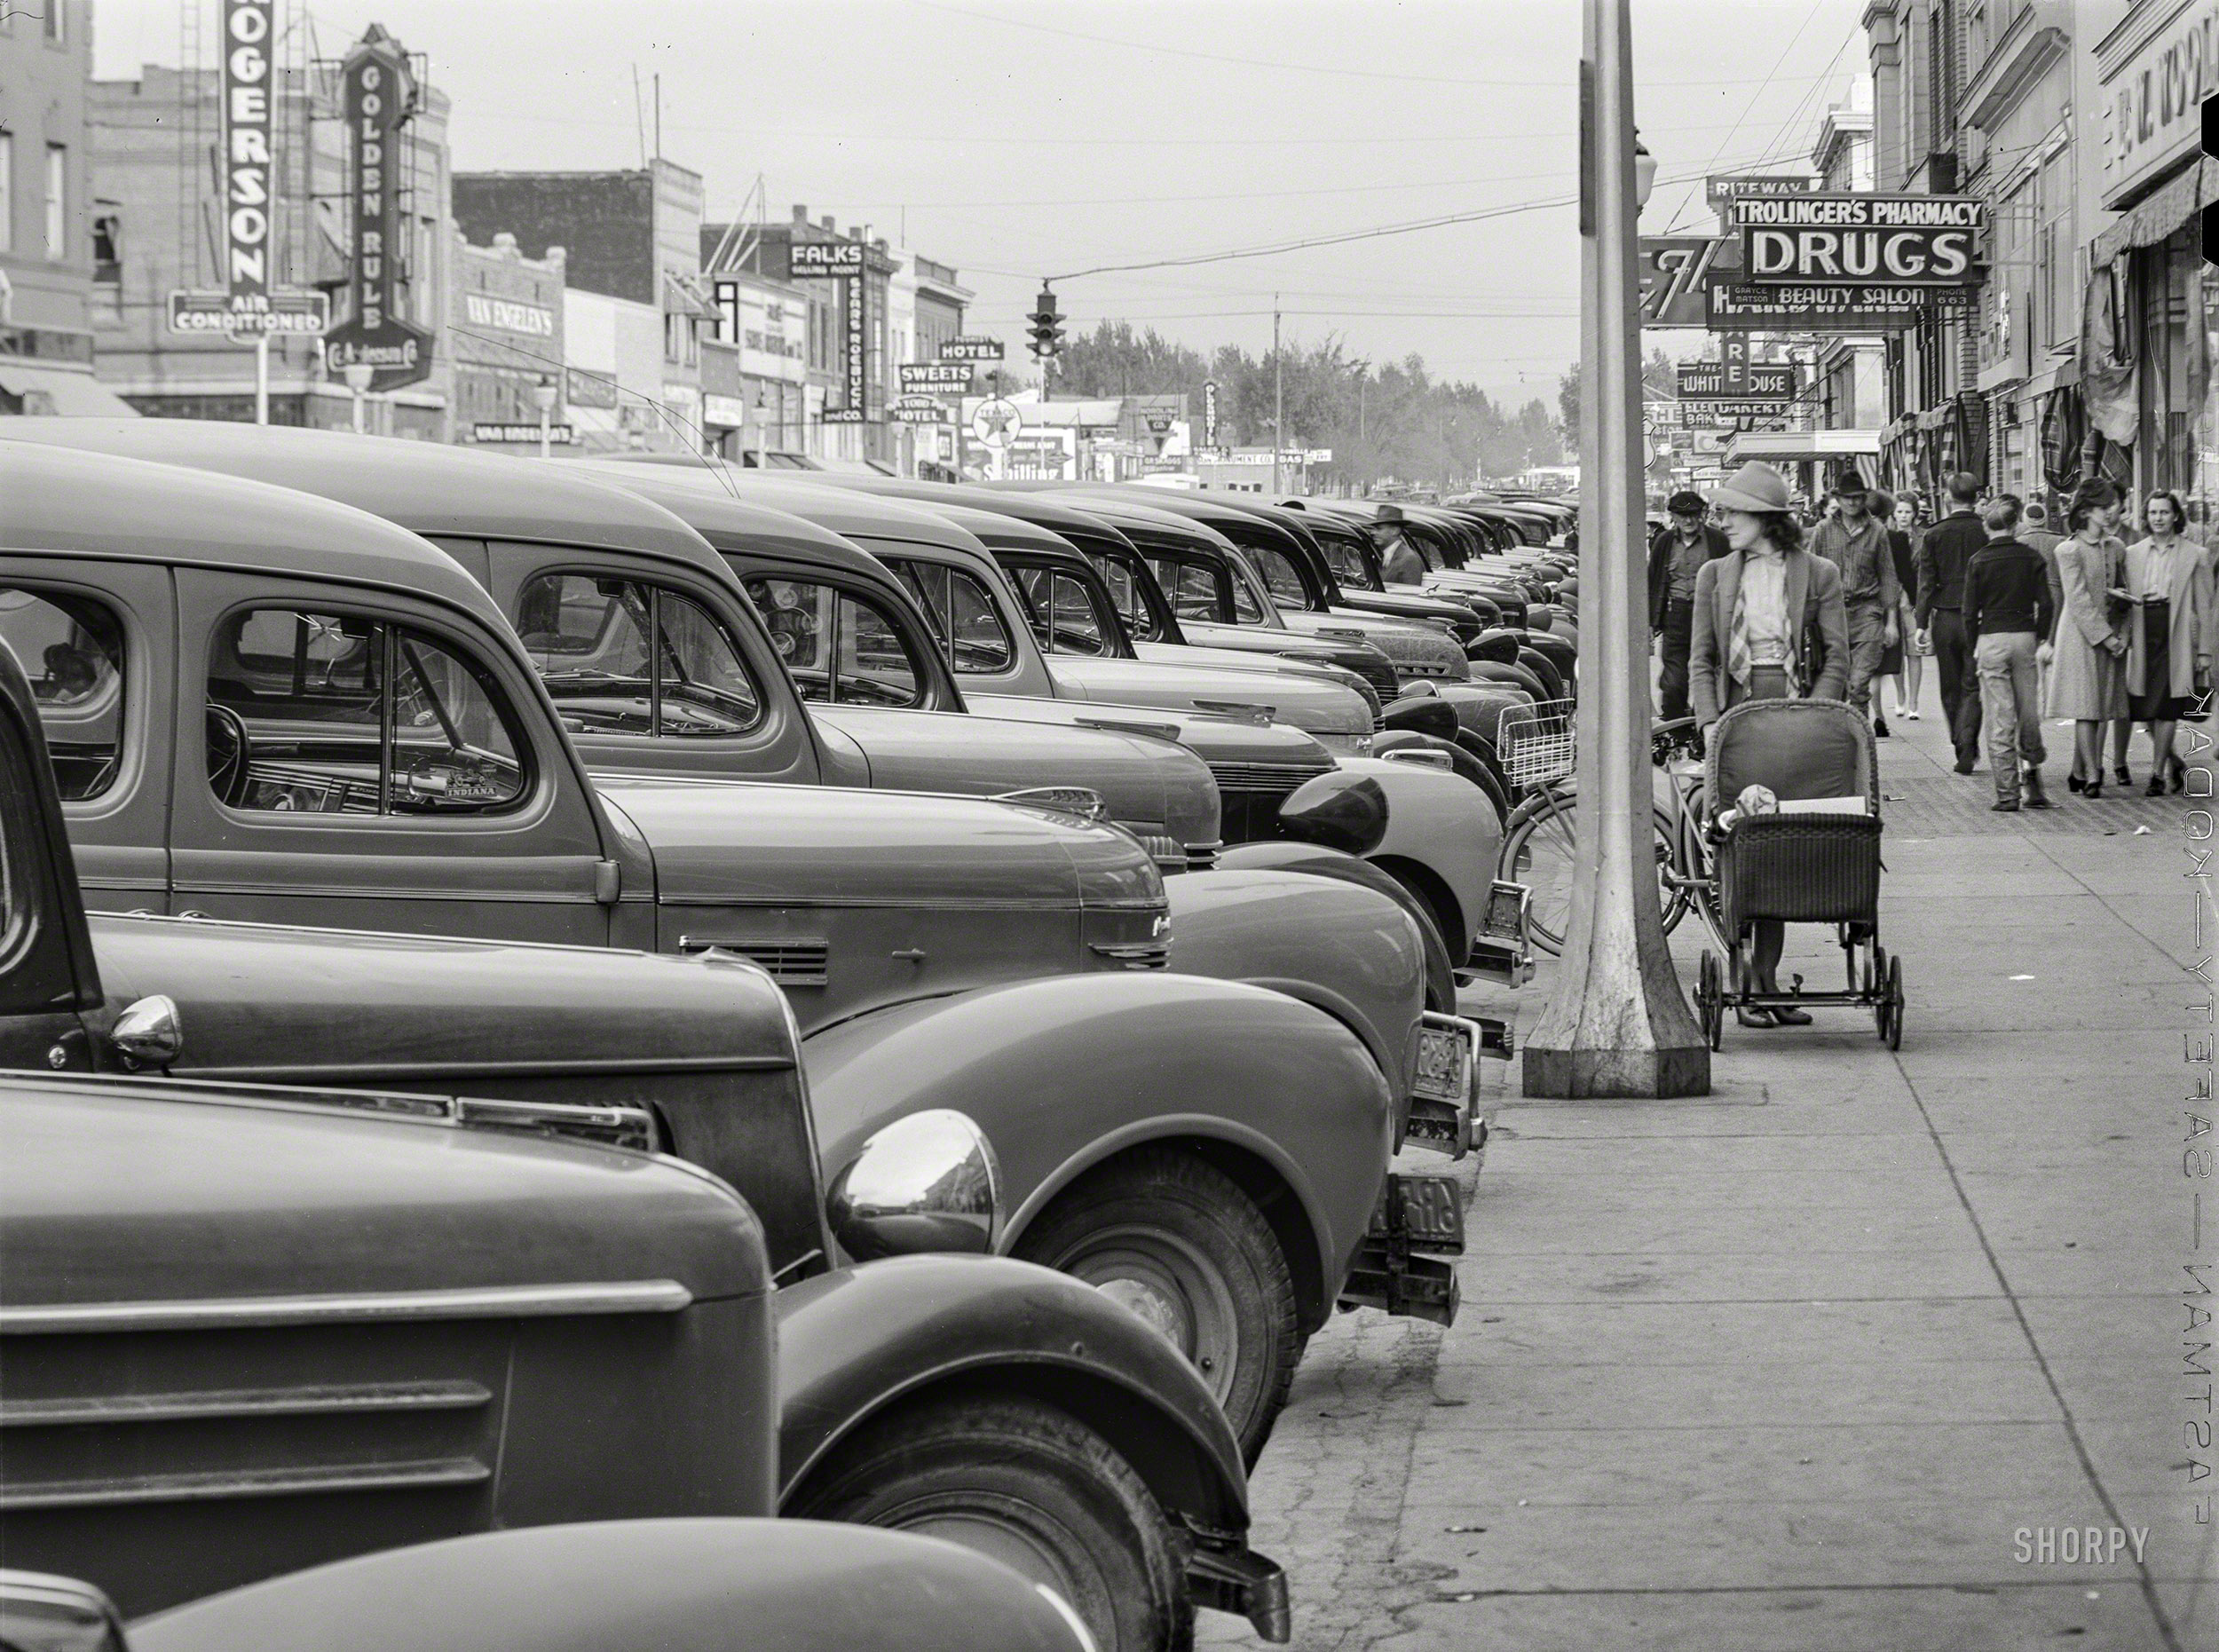 &nbsp; &nbsp; &nbsp; &nbsp; From start to finish, a life on wheels.
May 1941. "Main street of Twin Falls, Idaho. According to Idaho State Guide (Federal Writers Project), this town has the distinction, unusual in towns in the section, of being planned." Photo by Russell Lee for the FSA. View full size.